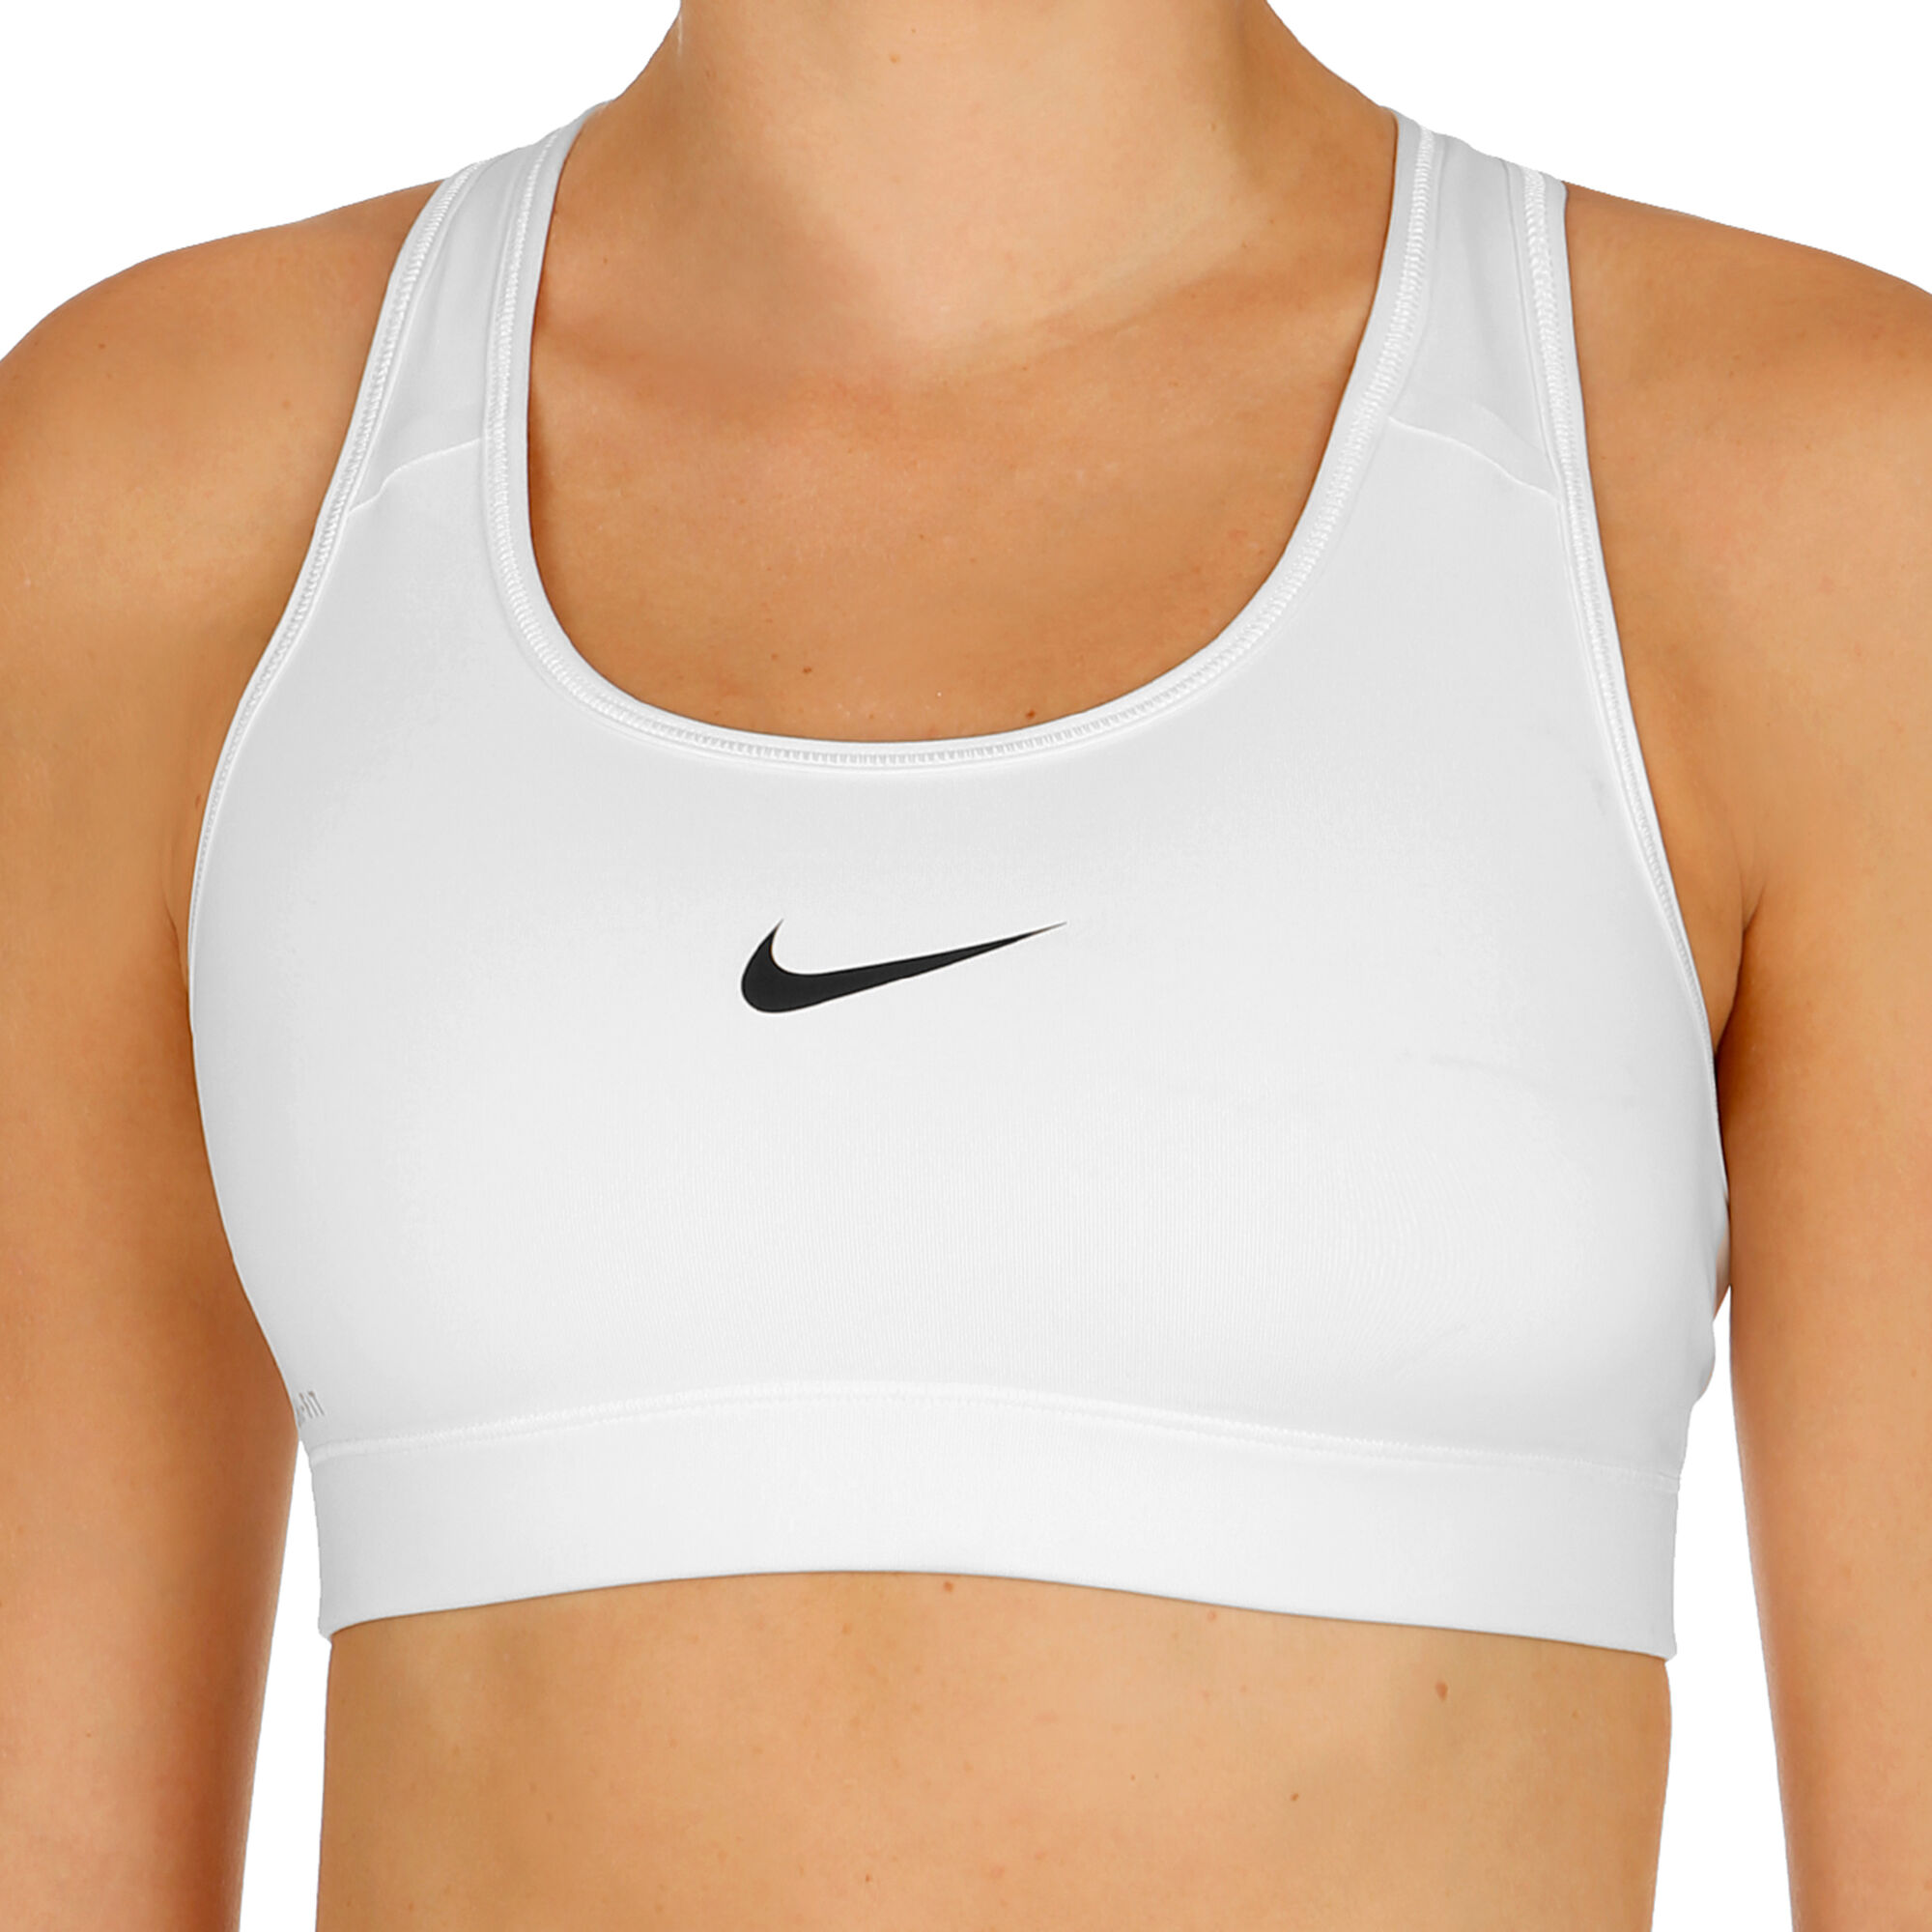 Sports Zone Aruba - Nike Victory Compression - DOUBLED-UP STYLE AND  SUPPORT. The Nike Victory Compression HBR Sports Bra offers 2 times the  style and support with a double-strap design boasting a